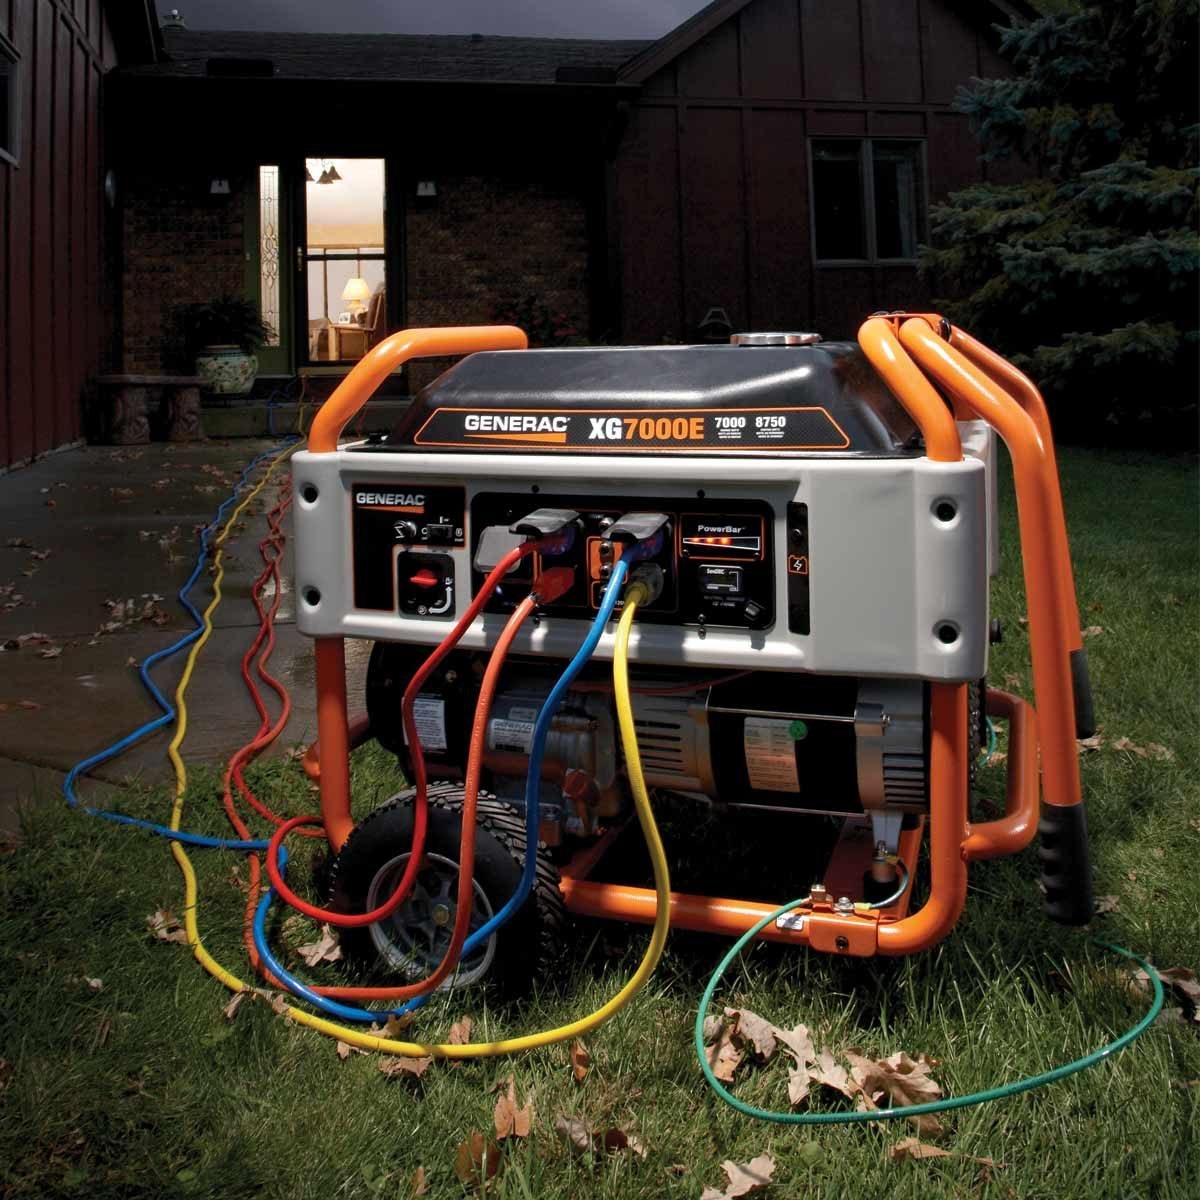 6 Tips for Maintaining Your Emergency Generator